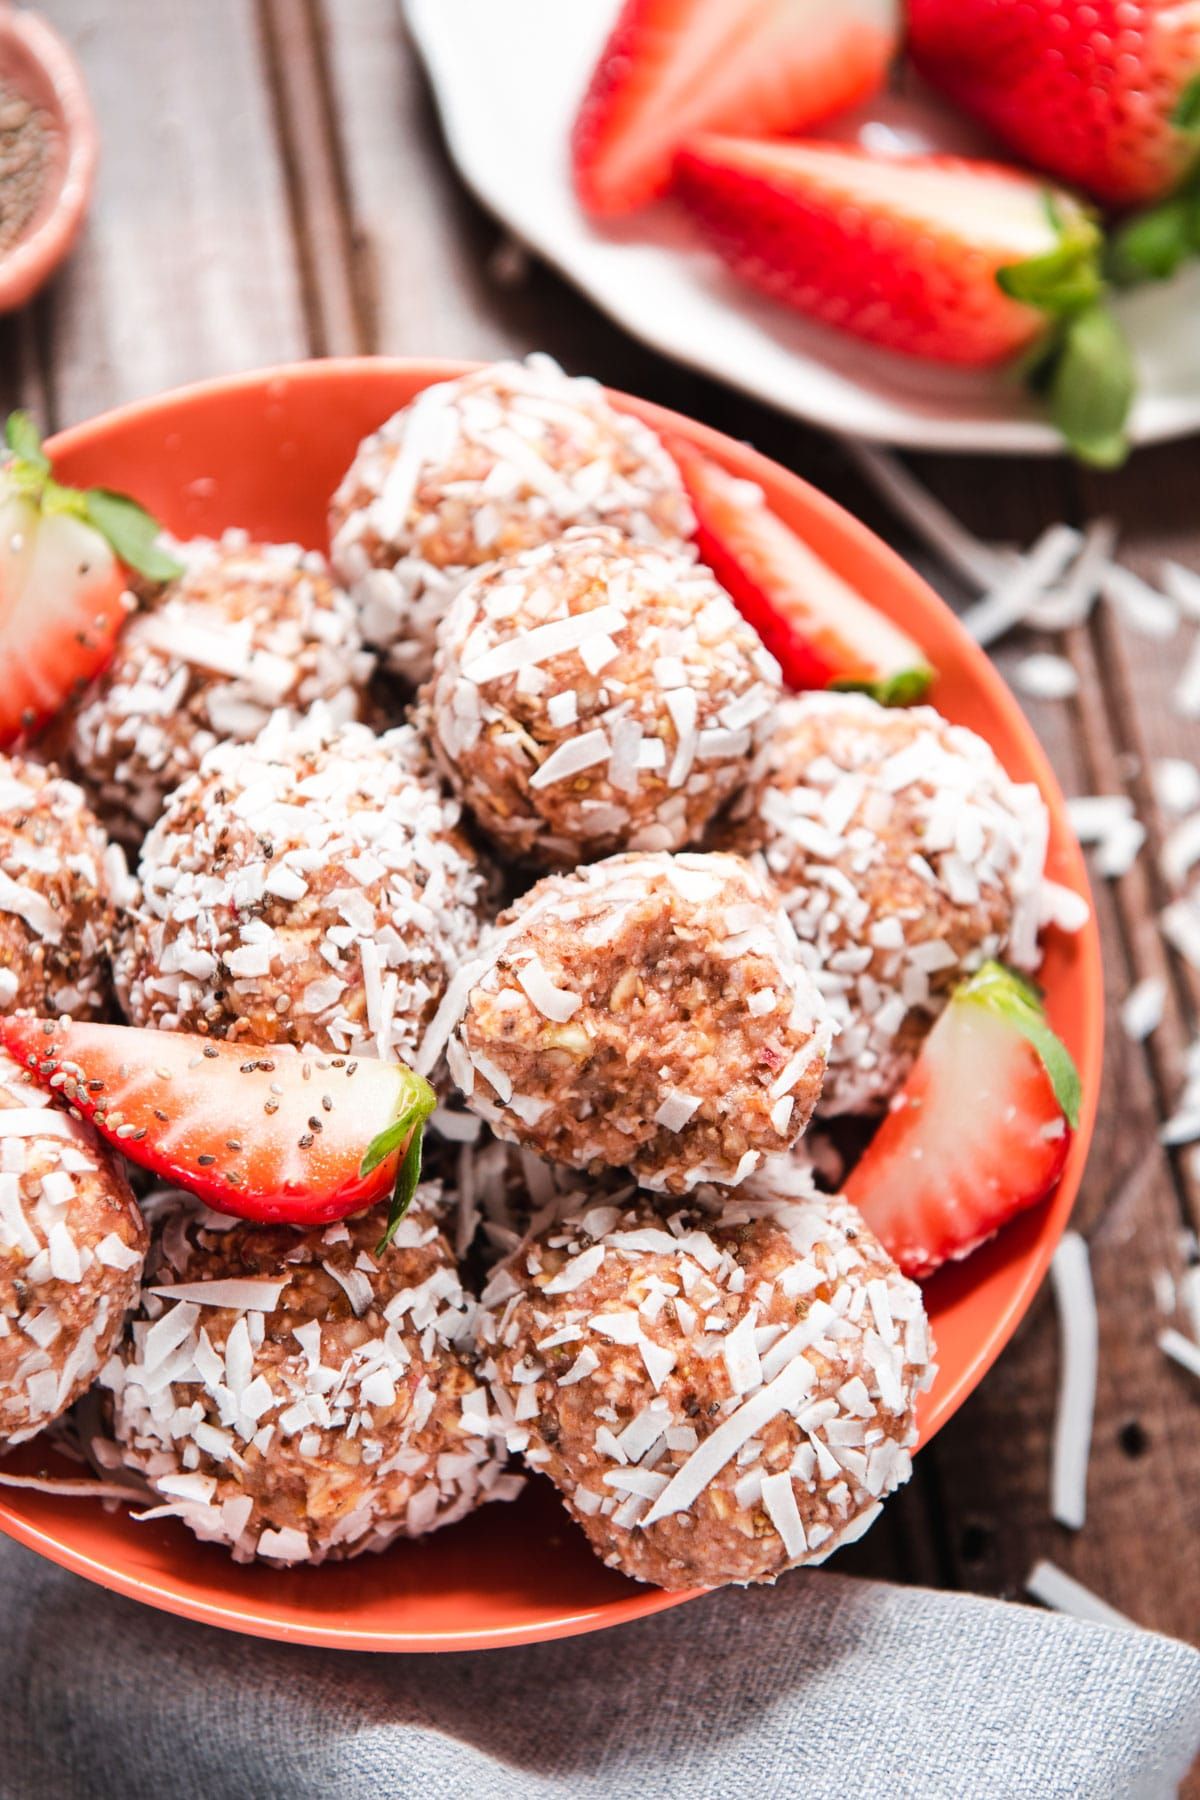 a red bowl of strawberry almond balls rolled in dessicated coconut